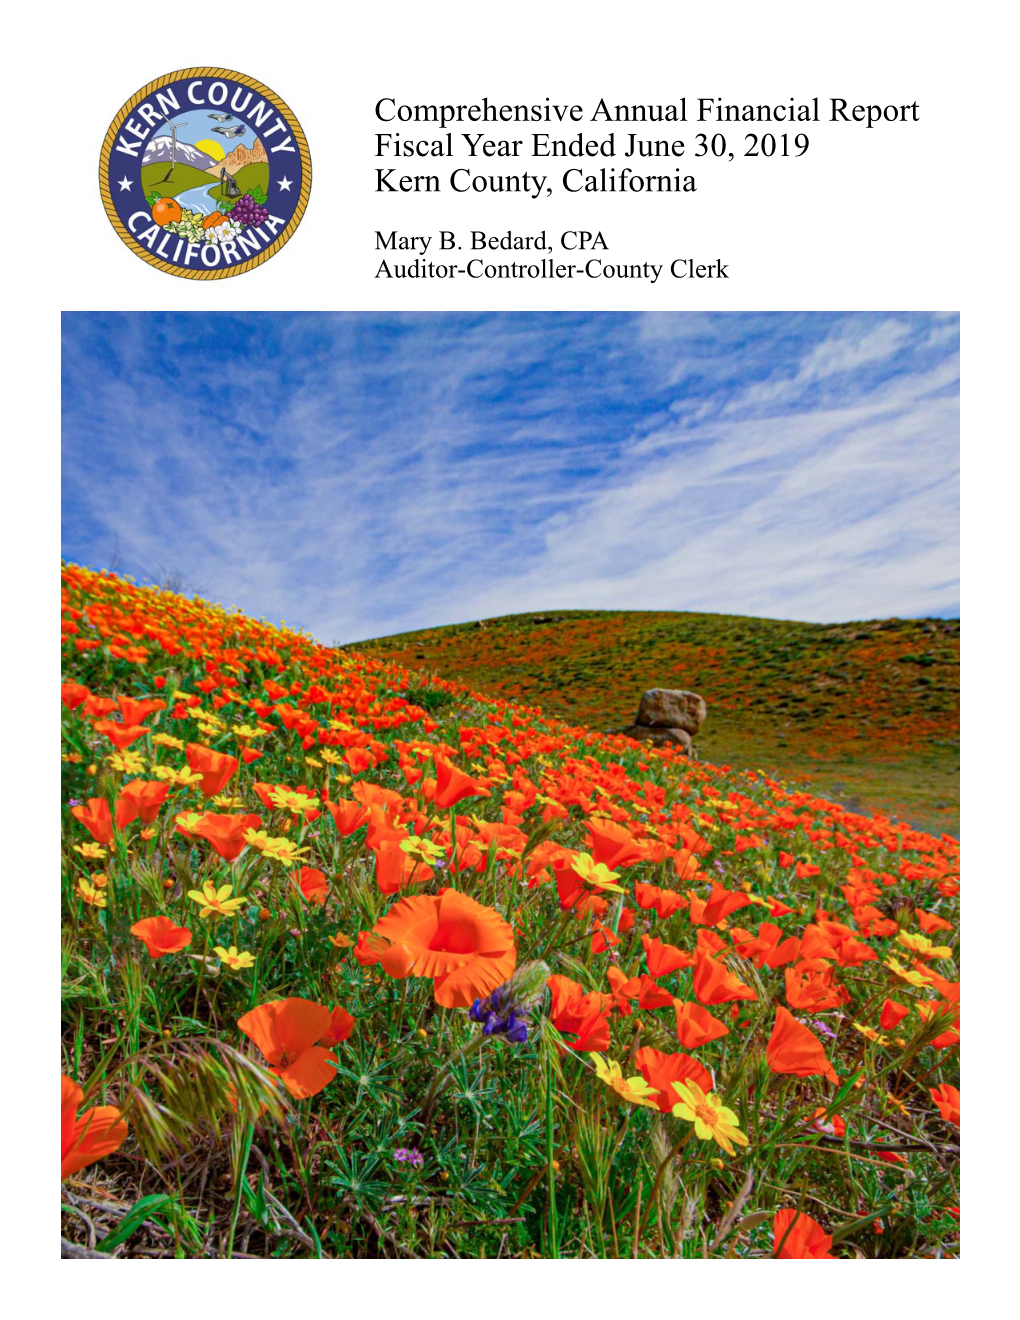 Comprehensive Annual Financial Report Fiscal Year Ended June 30, 2019 Kern County, California